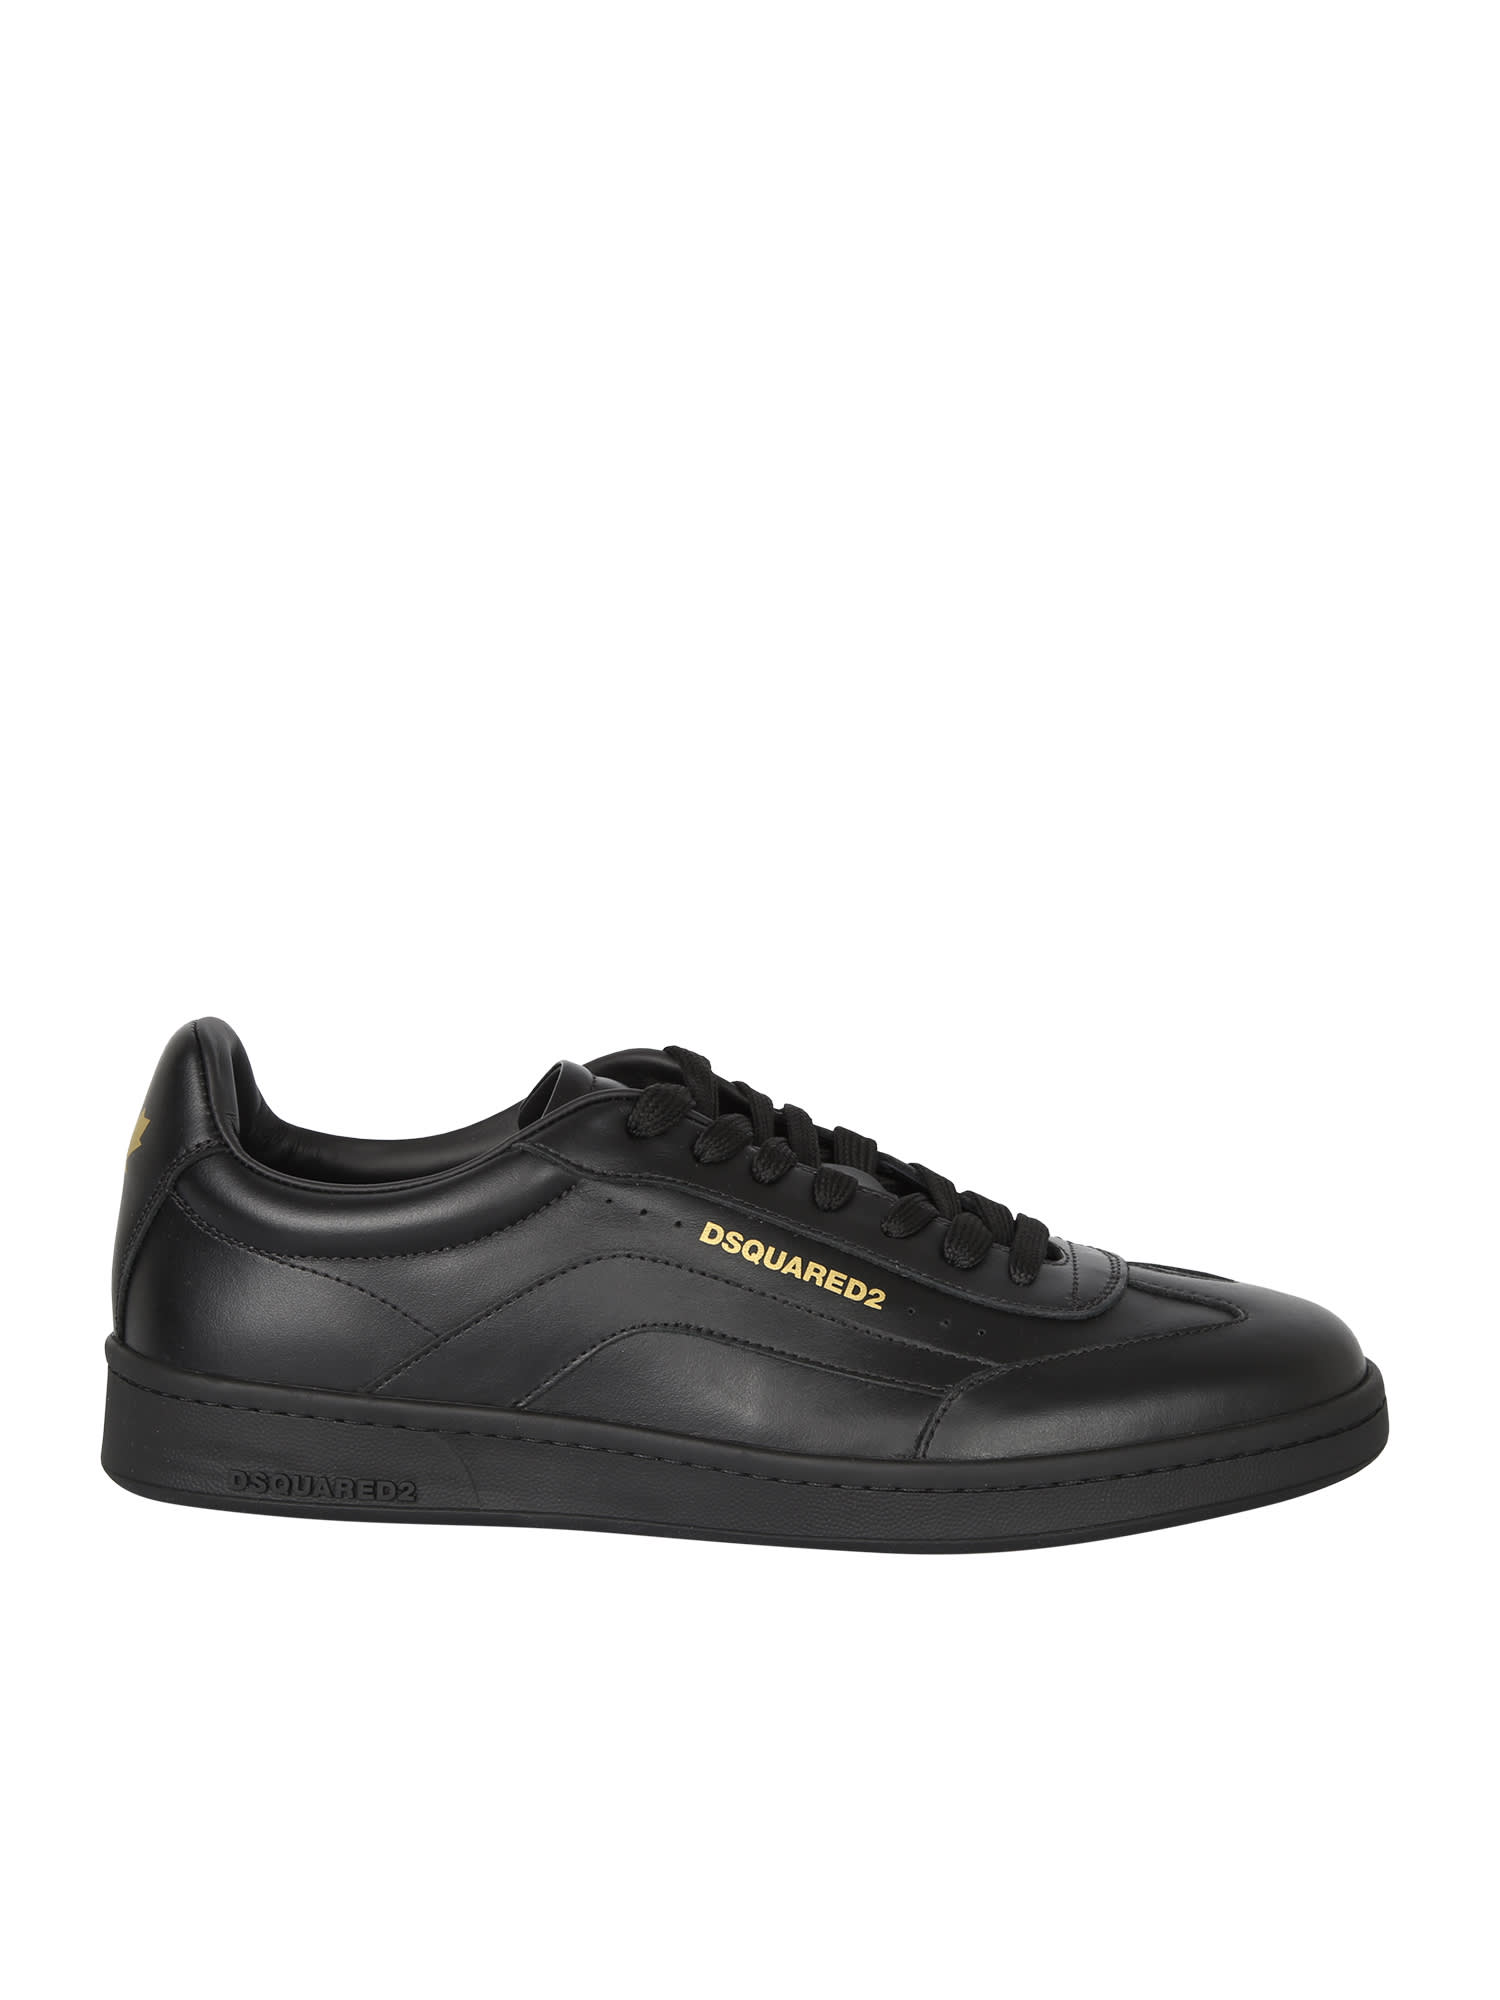 Dsquared2 Branded Sneakers